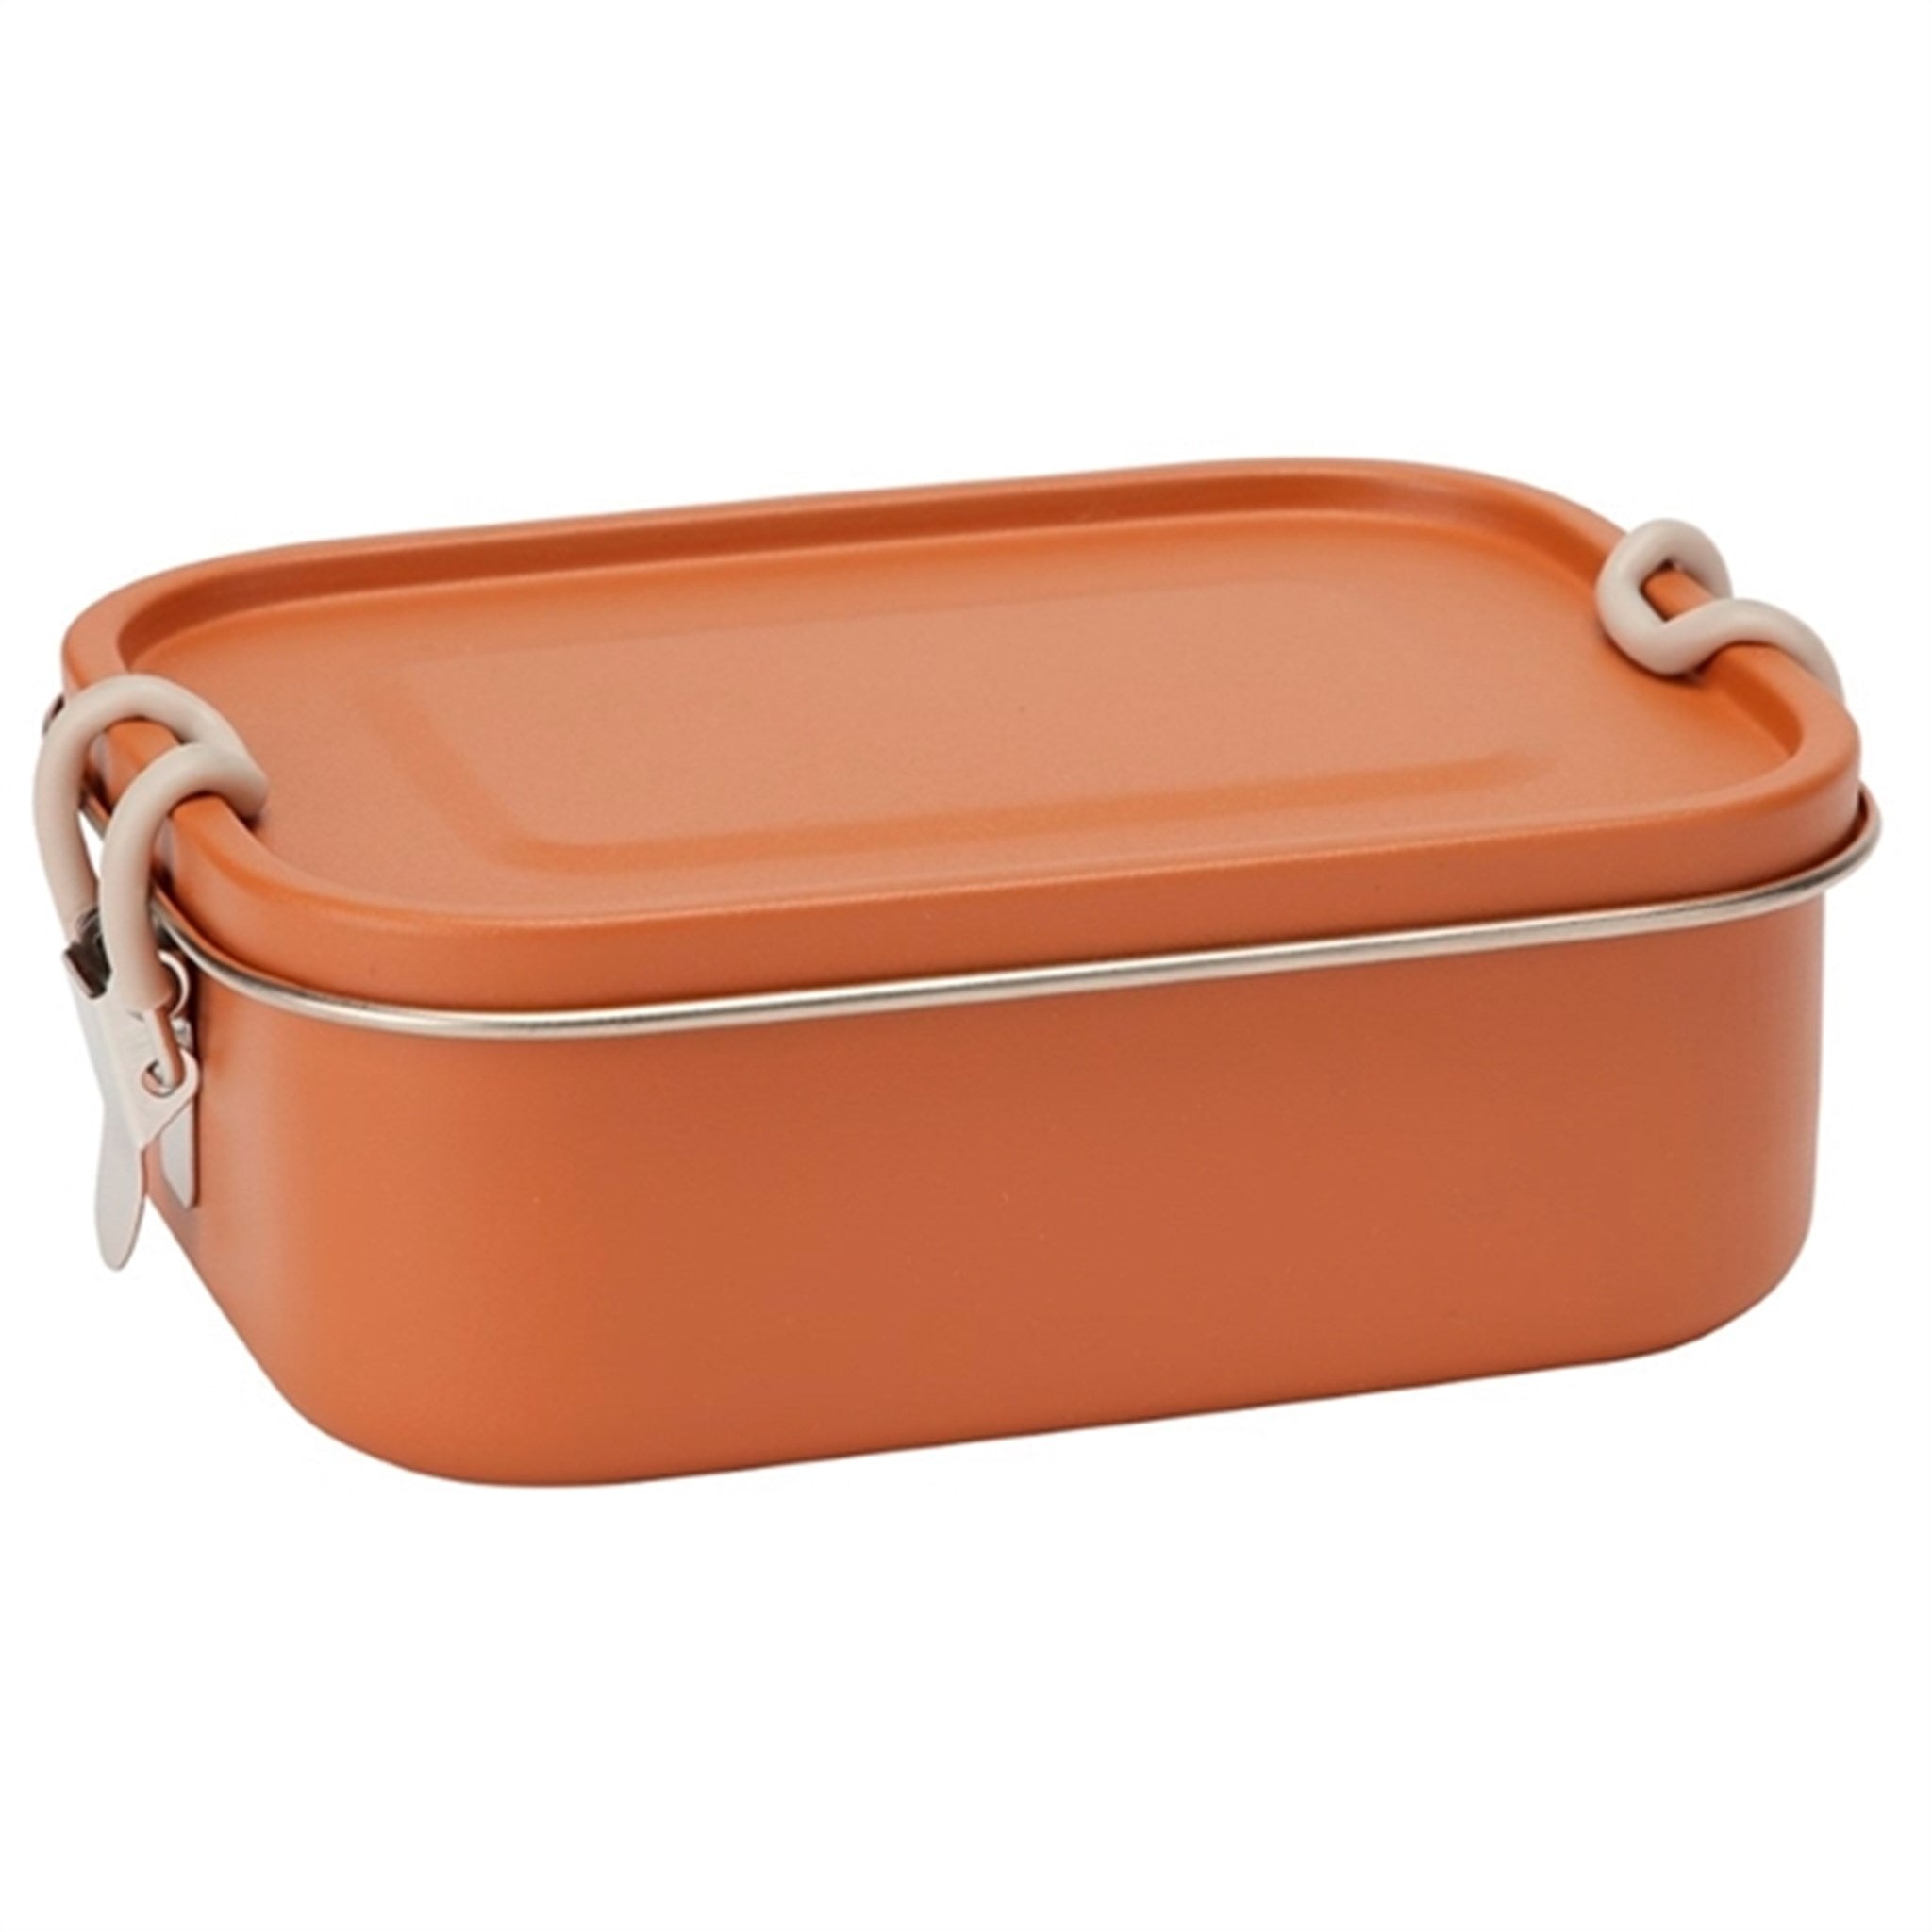 Haps Nordic Lunch Box with Removable Divider Terracotta